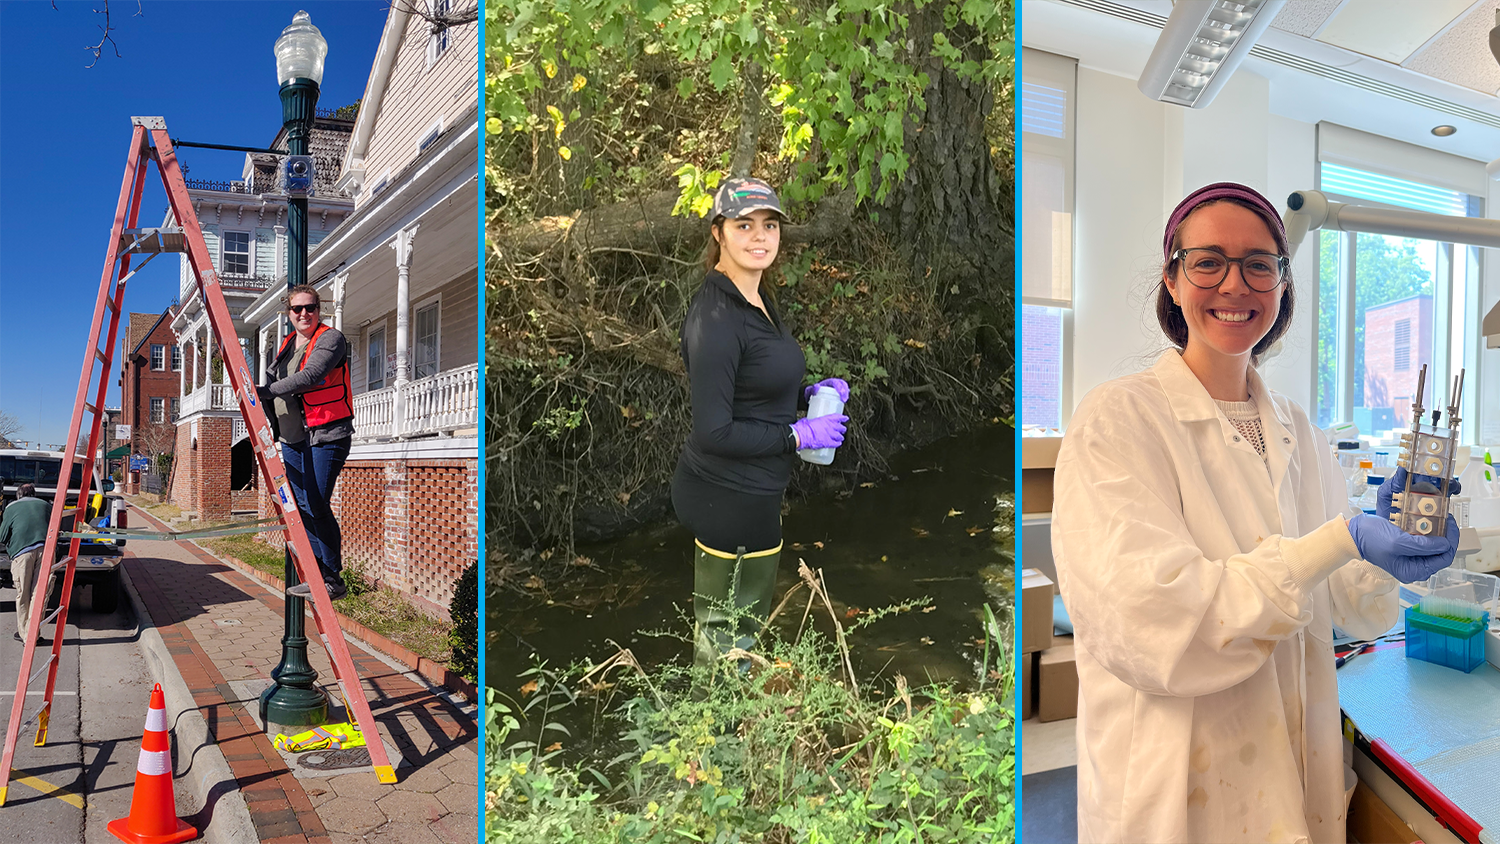 Above, left to right: Lauren Grimley installs a sensor to measure water in the storm drain and capture images of roadway flooding in real-time in New Bern, North Carolina, as part of the North Carolina Sea Grant-funded Sunny Day Flooding Project; Emine Fidan collects flood water samples from Hurricane Florence for her research project; and Holly Haflich puts together the electrochemical cell she will use for selective PFAS removal from natural waters.